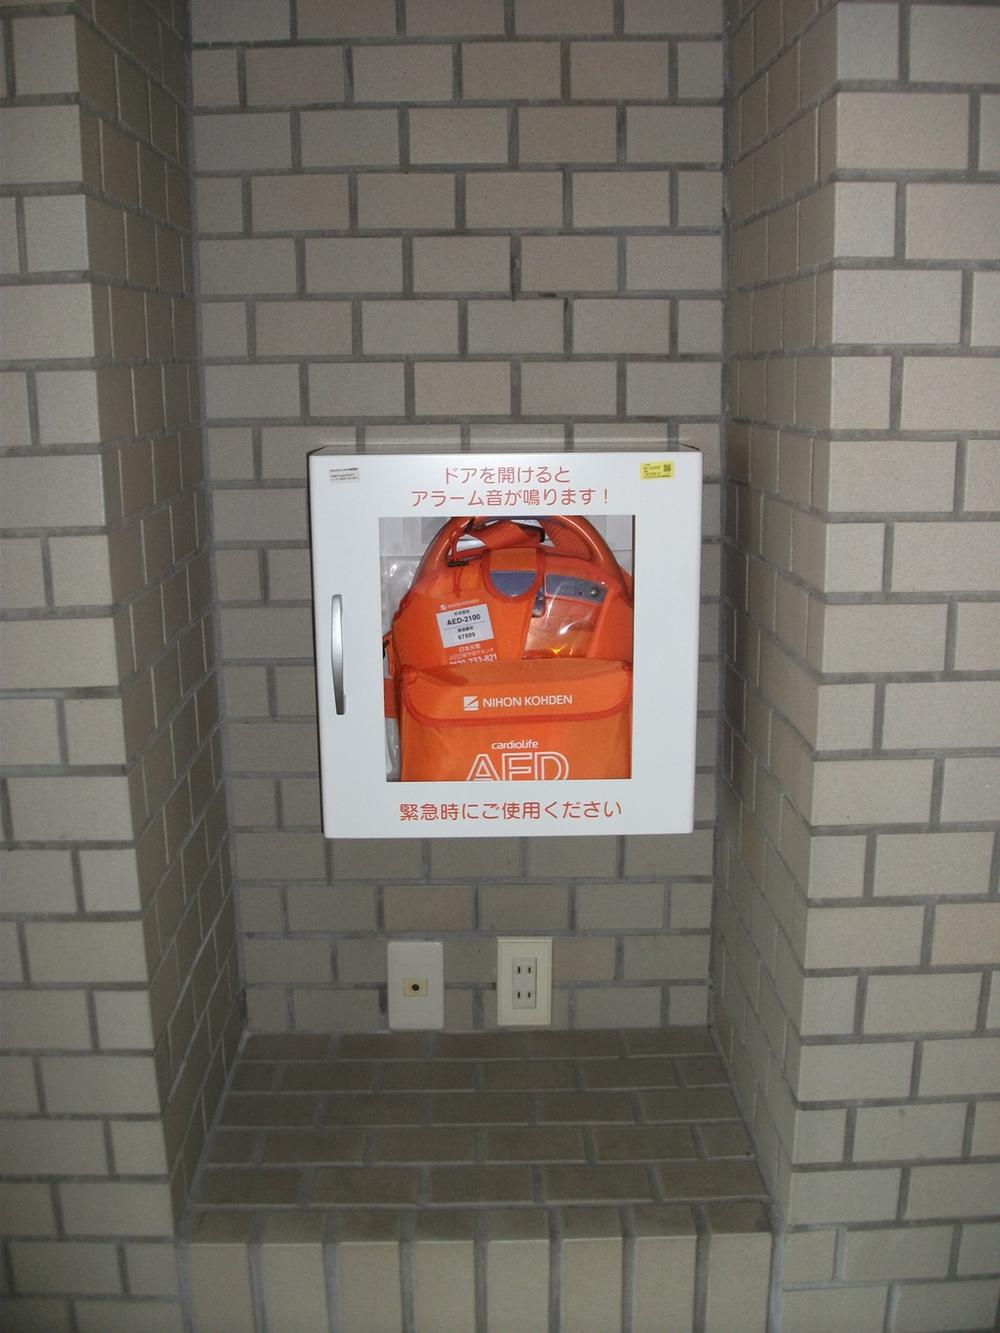 Entrance. AED equipment in the 1F common areas